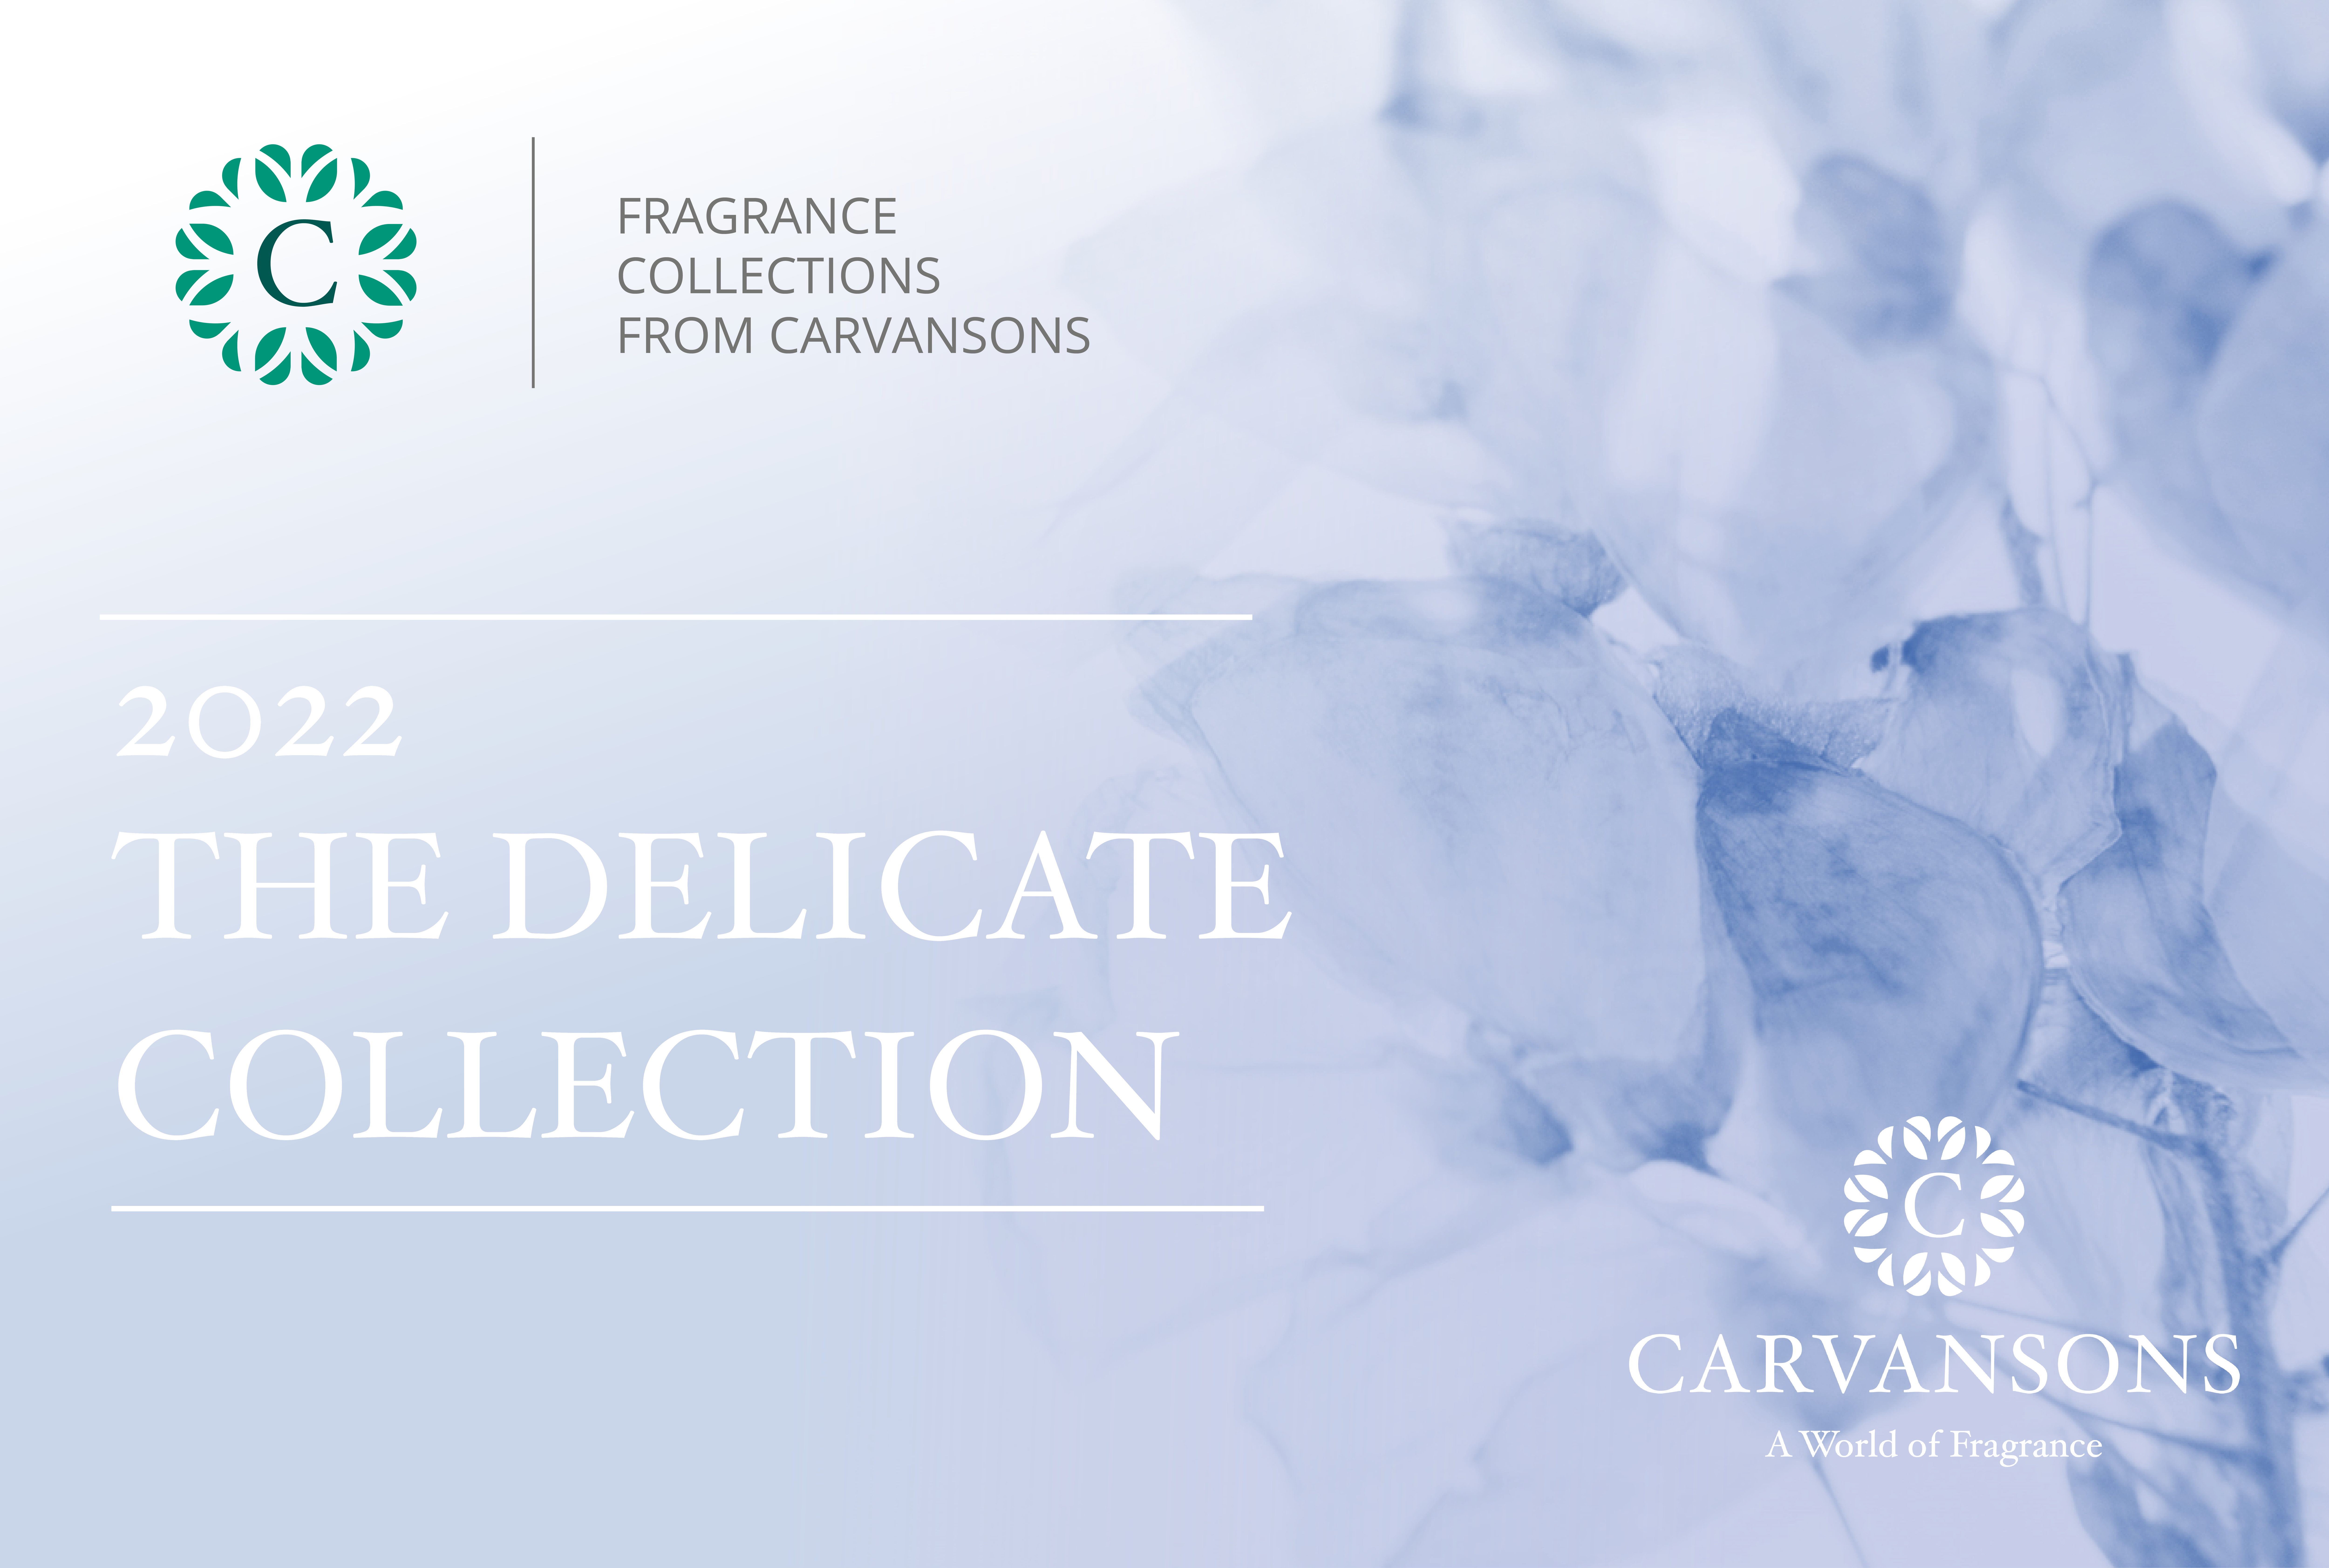 Collections - Delicate allergen-free